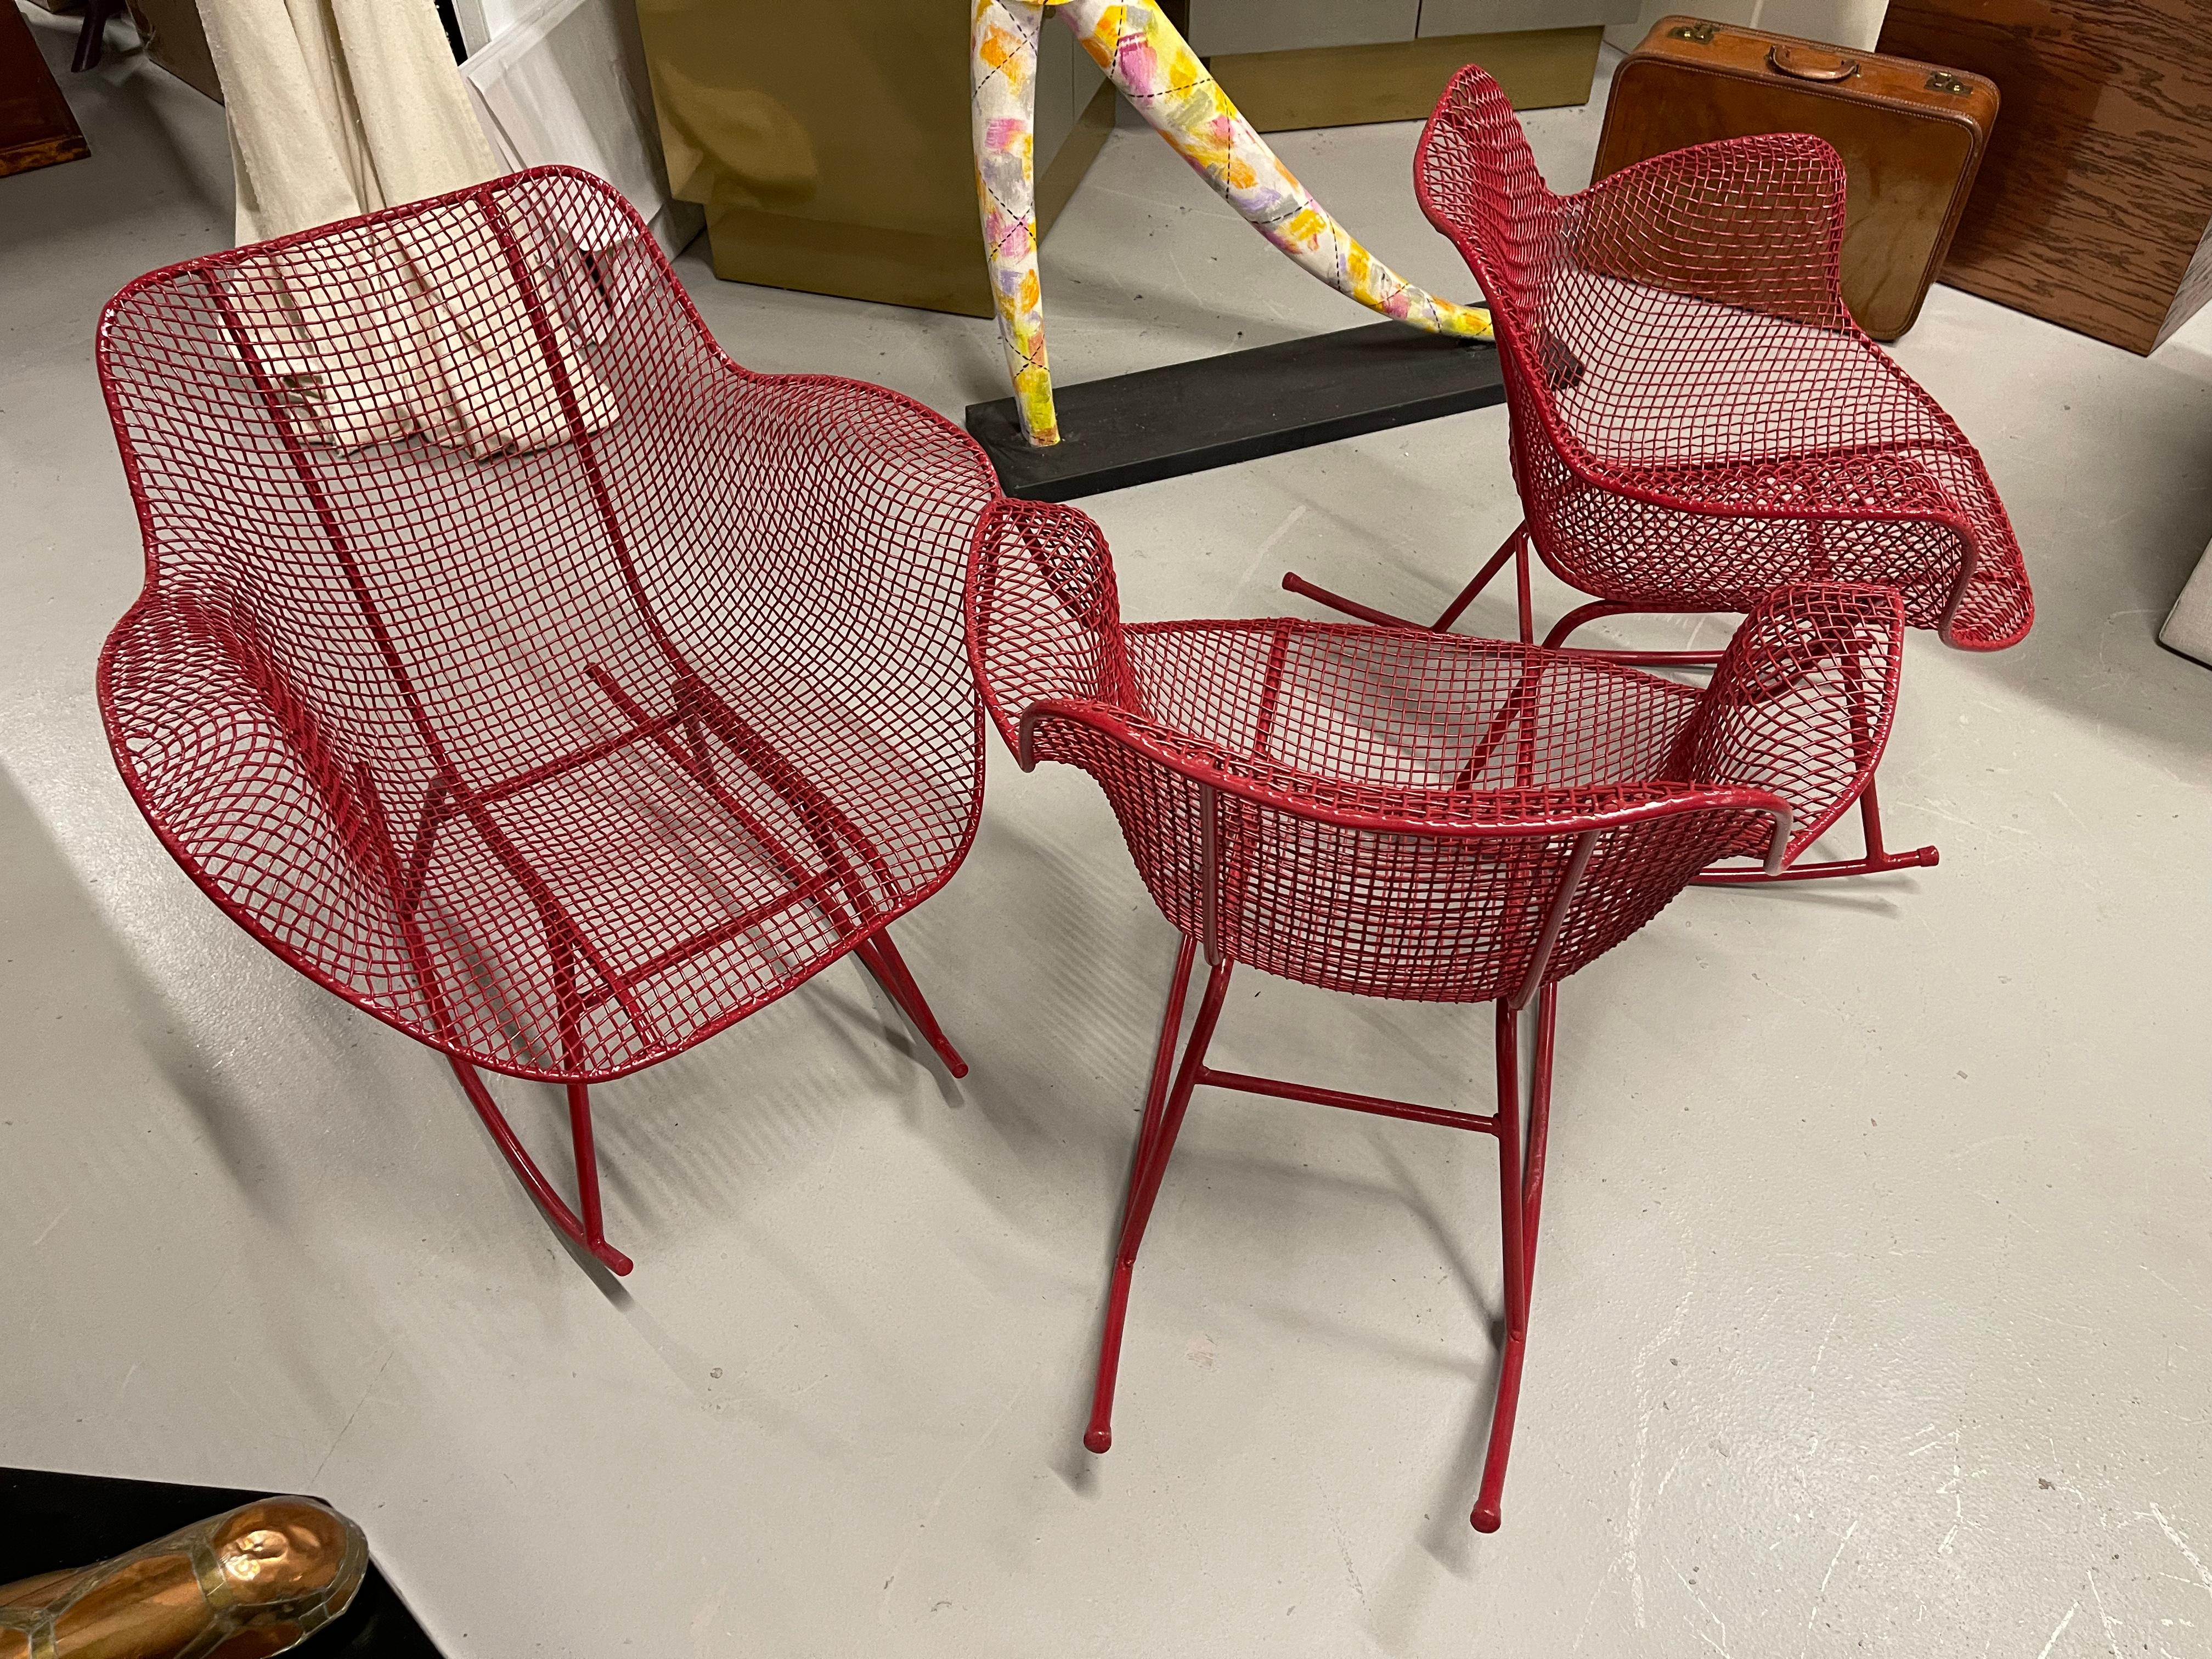 A set of three Russell Woodard Sculptura Rocking chairs or rockers. In good condition with no breaks. Some minor paint loss. No pad inserts.